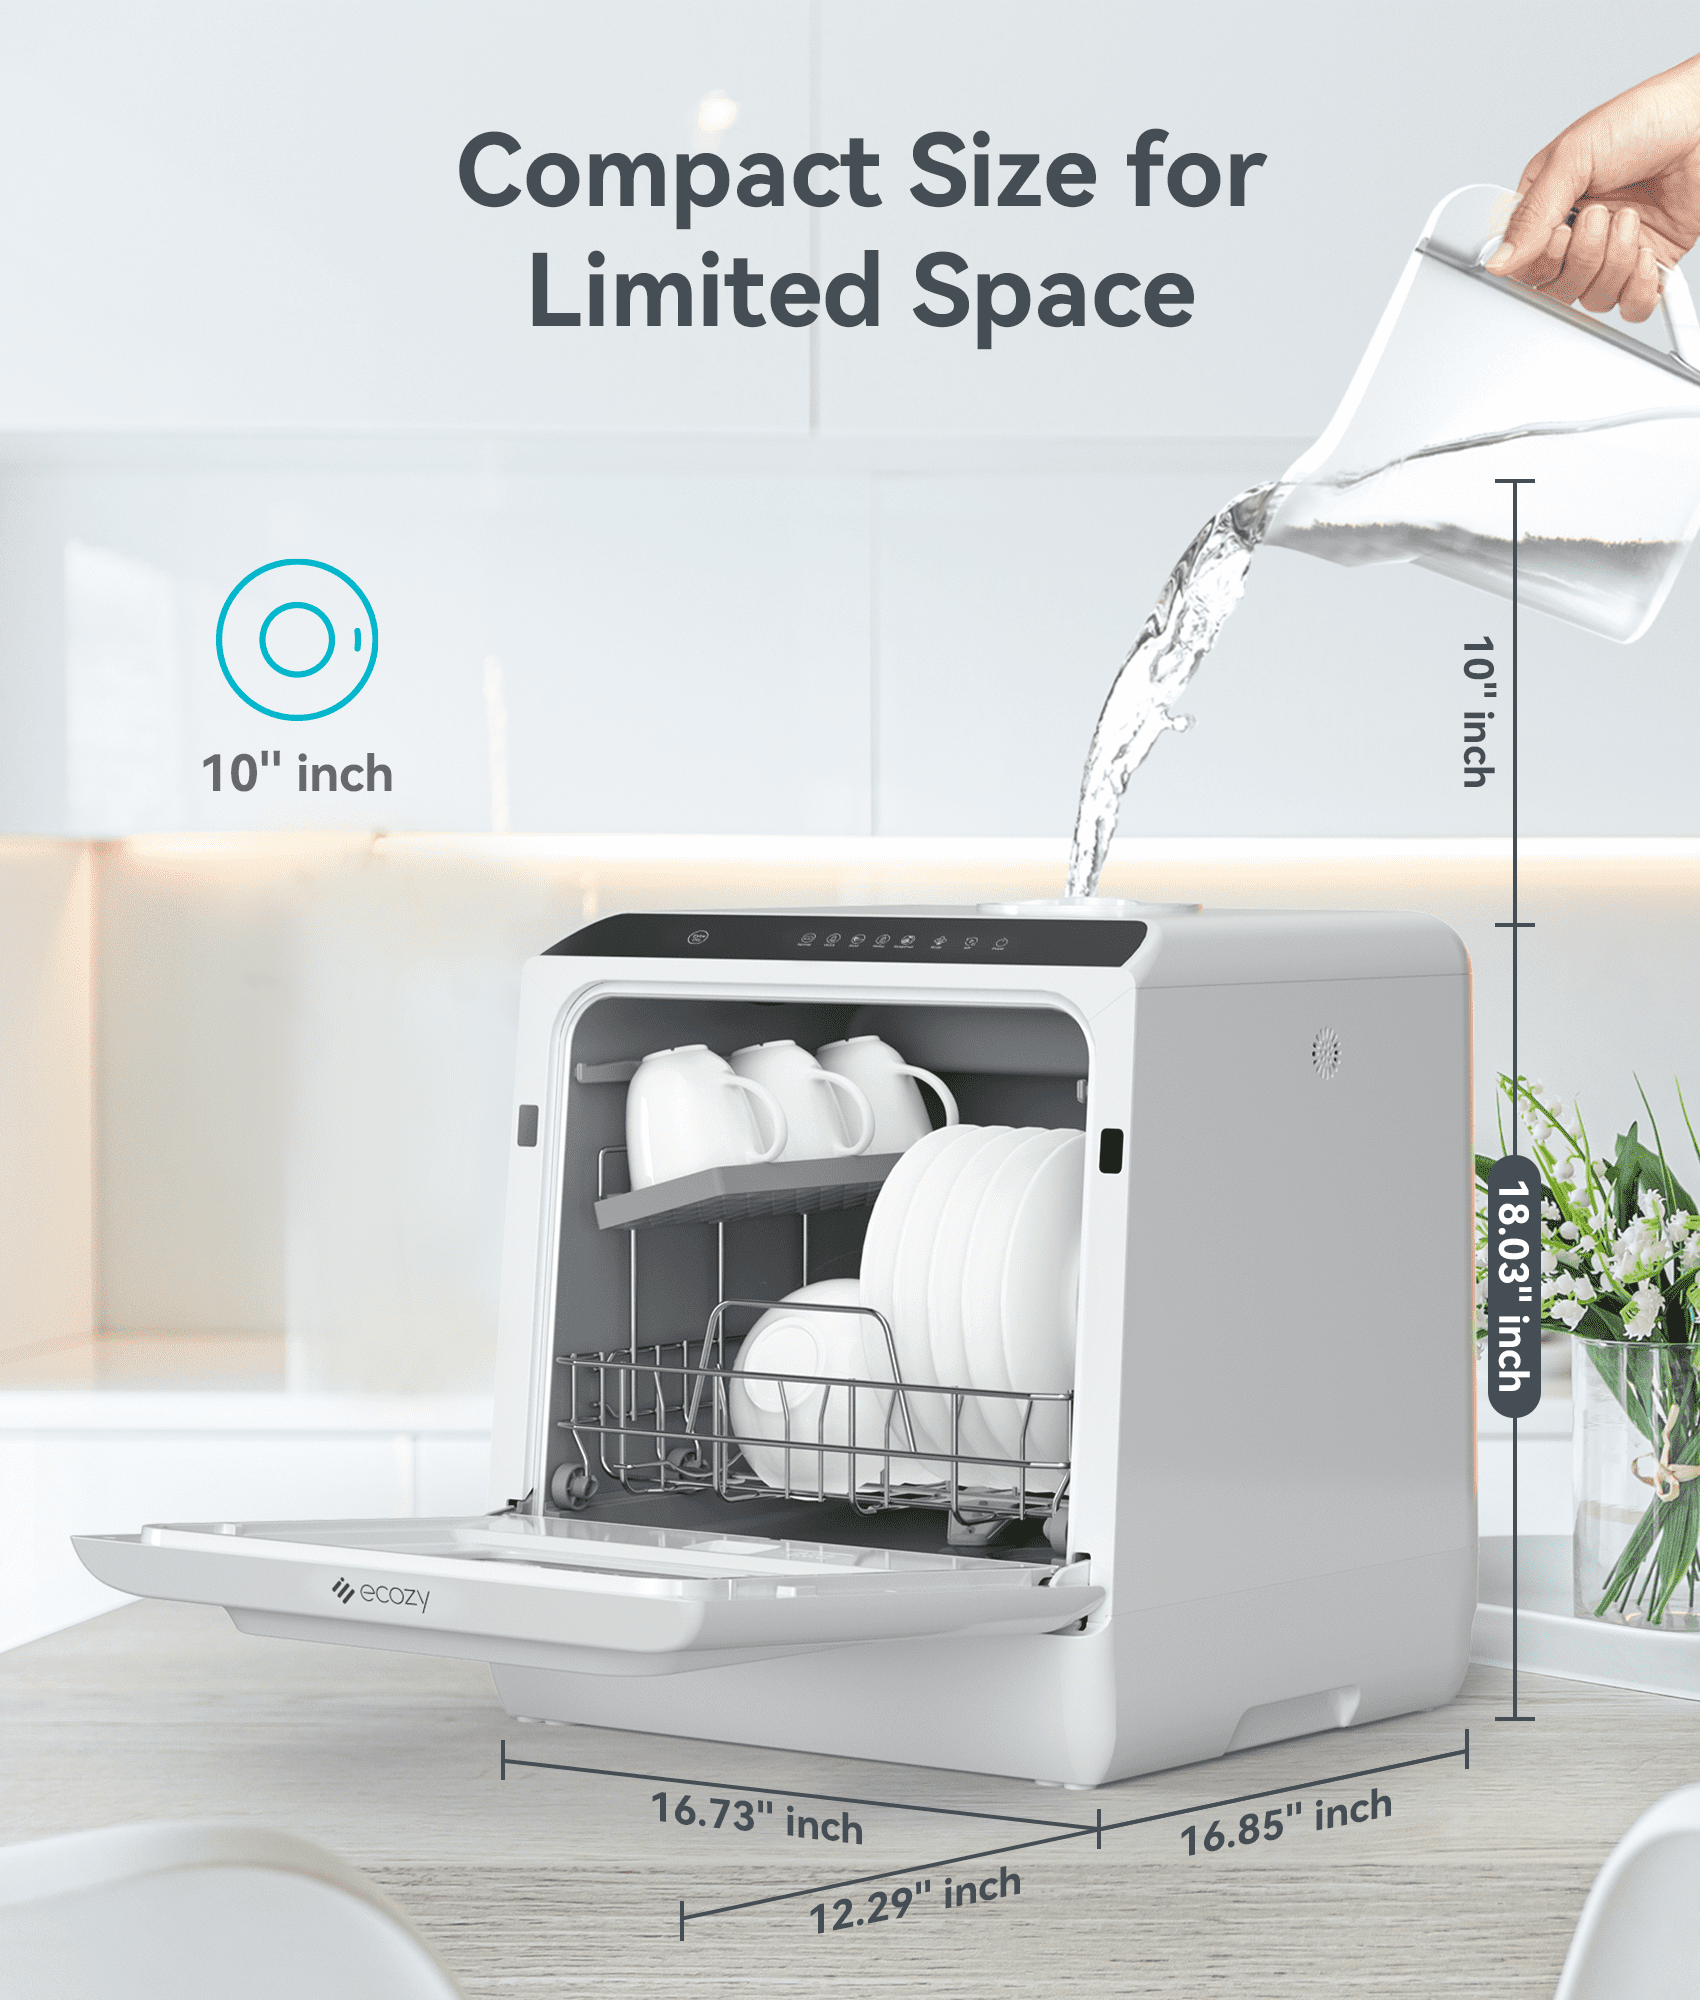 Home Portable Countertop Dishwasher with Built-In Water Tank and Hook Up